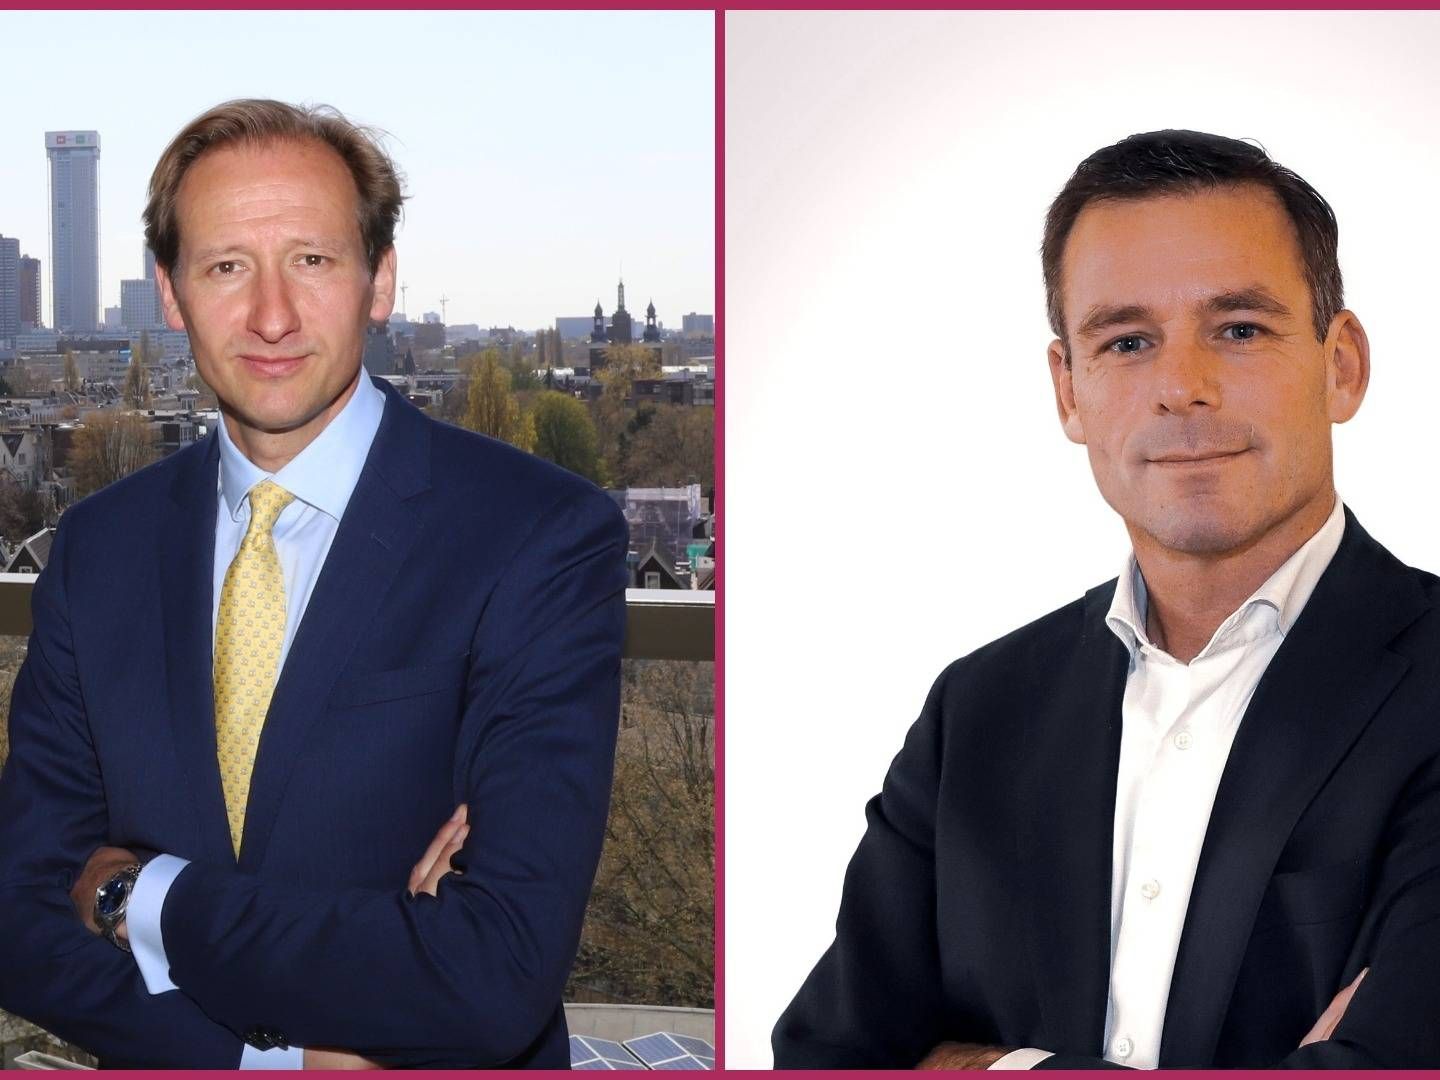 Stefan Laszlo and Bas Eestermans, Executive Directors for Institutional Client Relations inthe Nordics | Photo: PR / Robeco